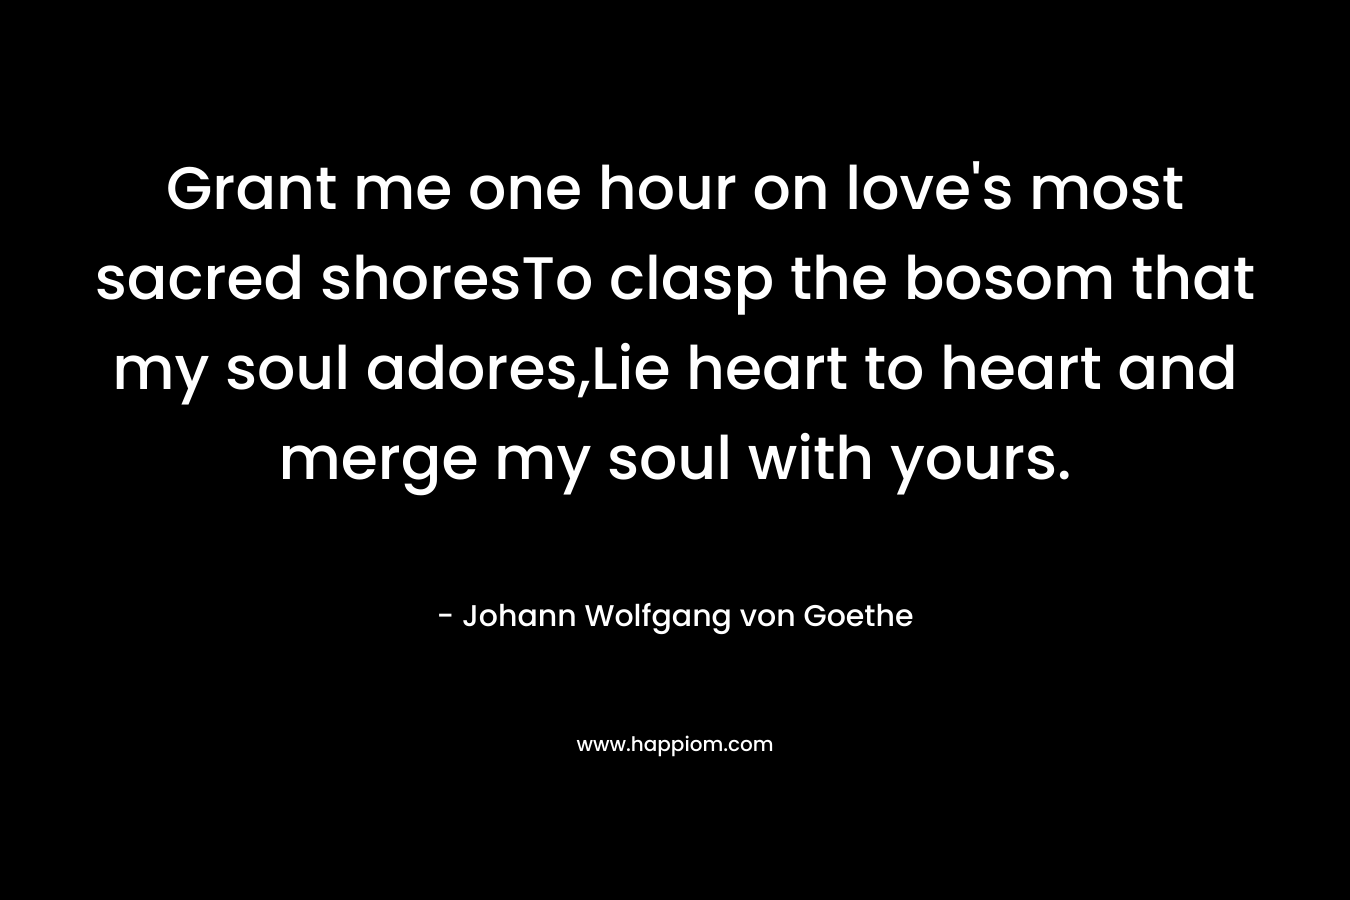 Grant me one hour on love’s most sacred shoresTo clasp the bosom that my soul adores,Lie heart to heart and merge my soul with yours. – Johann Wolfgang von Goethe